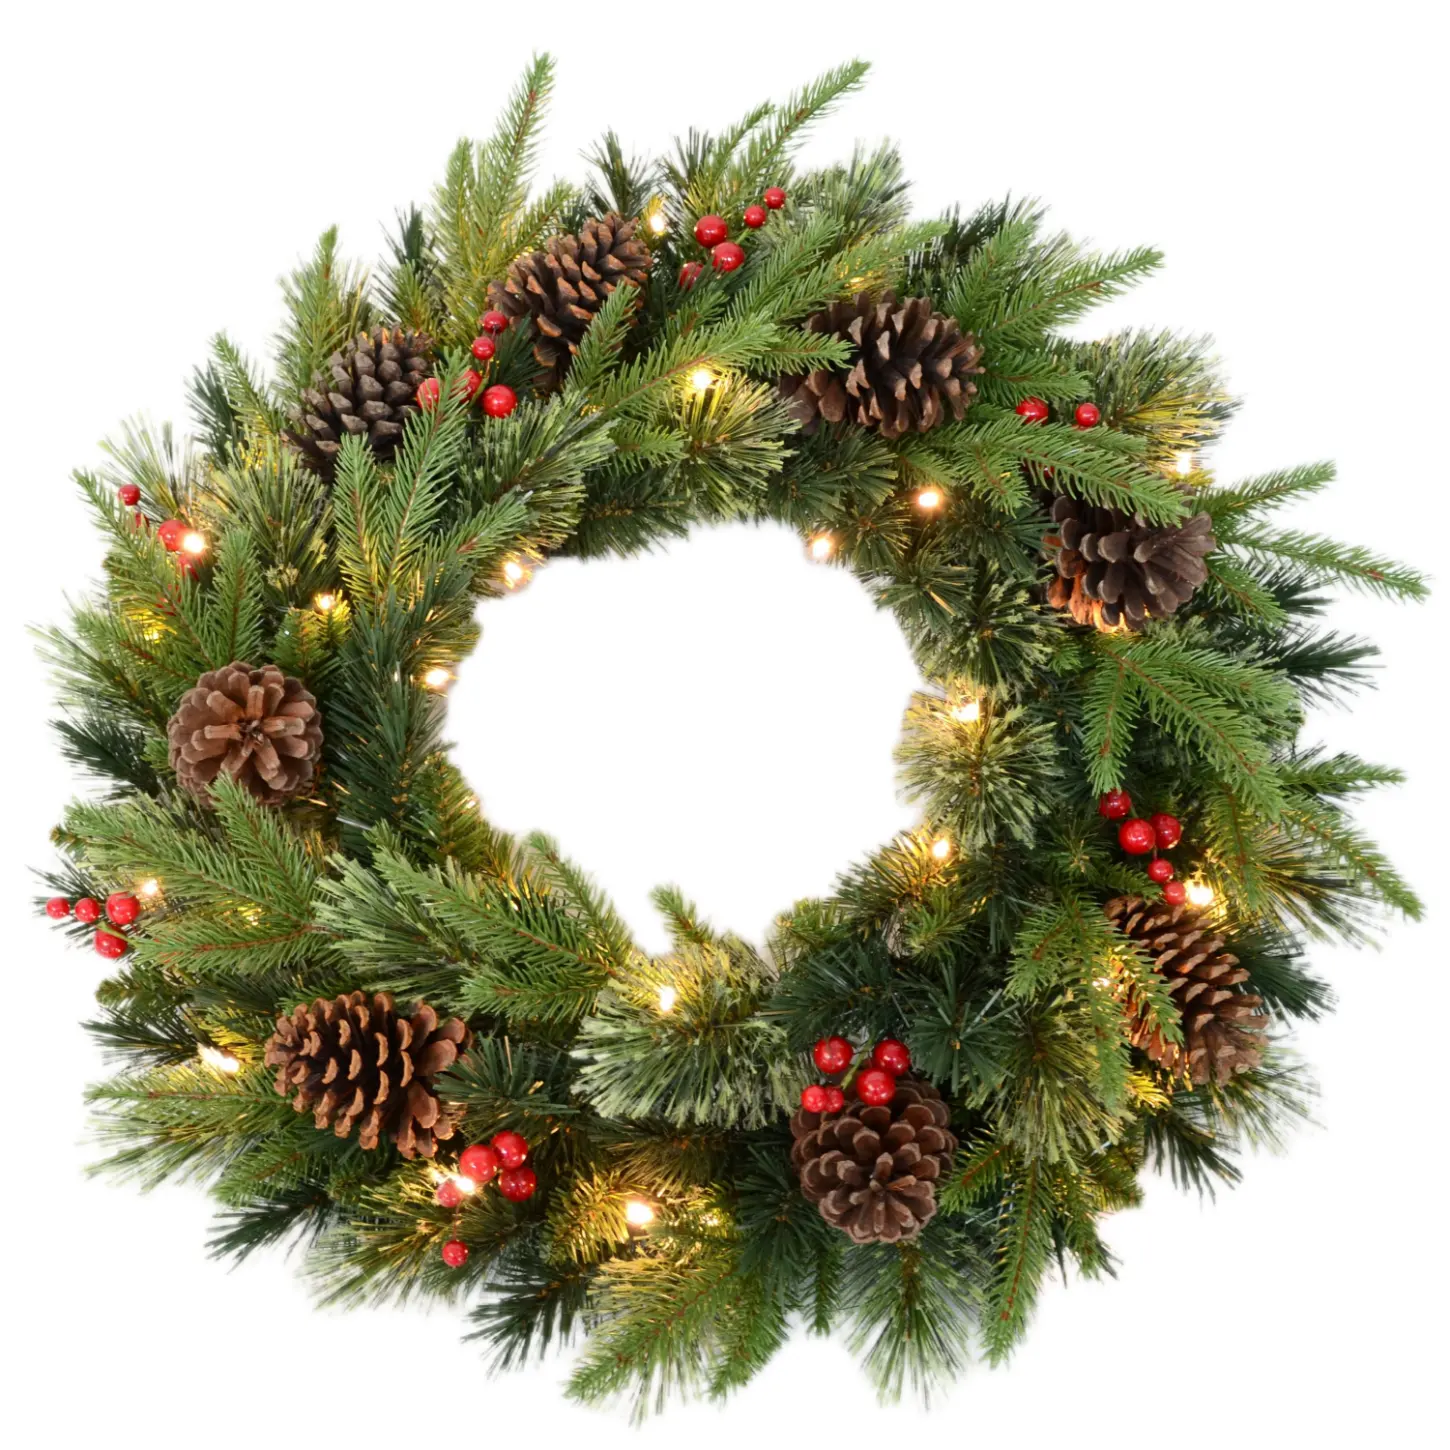 2023 New Christmas Indoor Artificial Garlands Wreaths Series For Home Christmas Ornaments